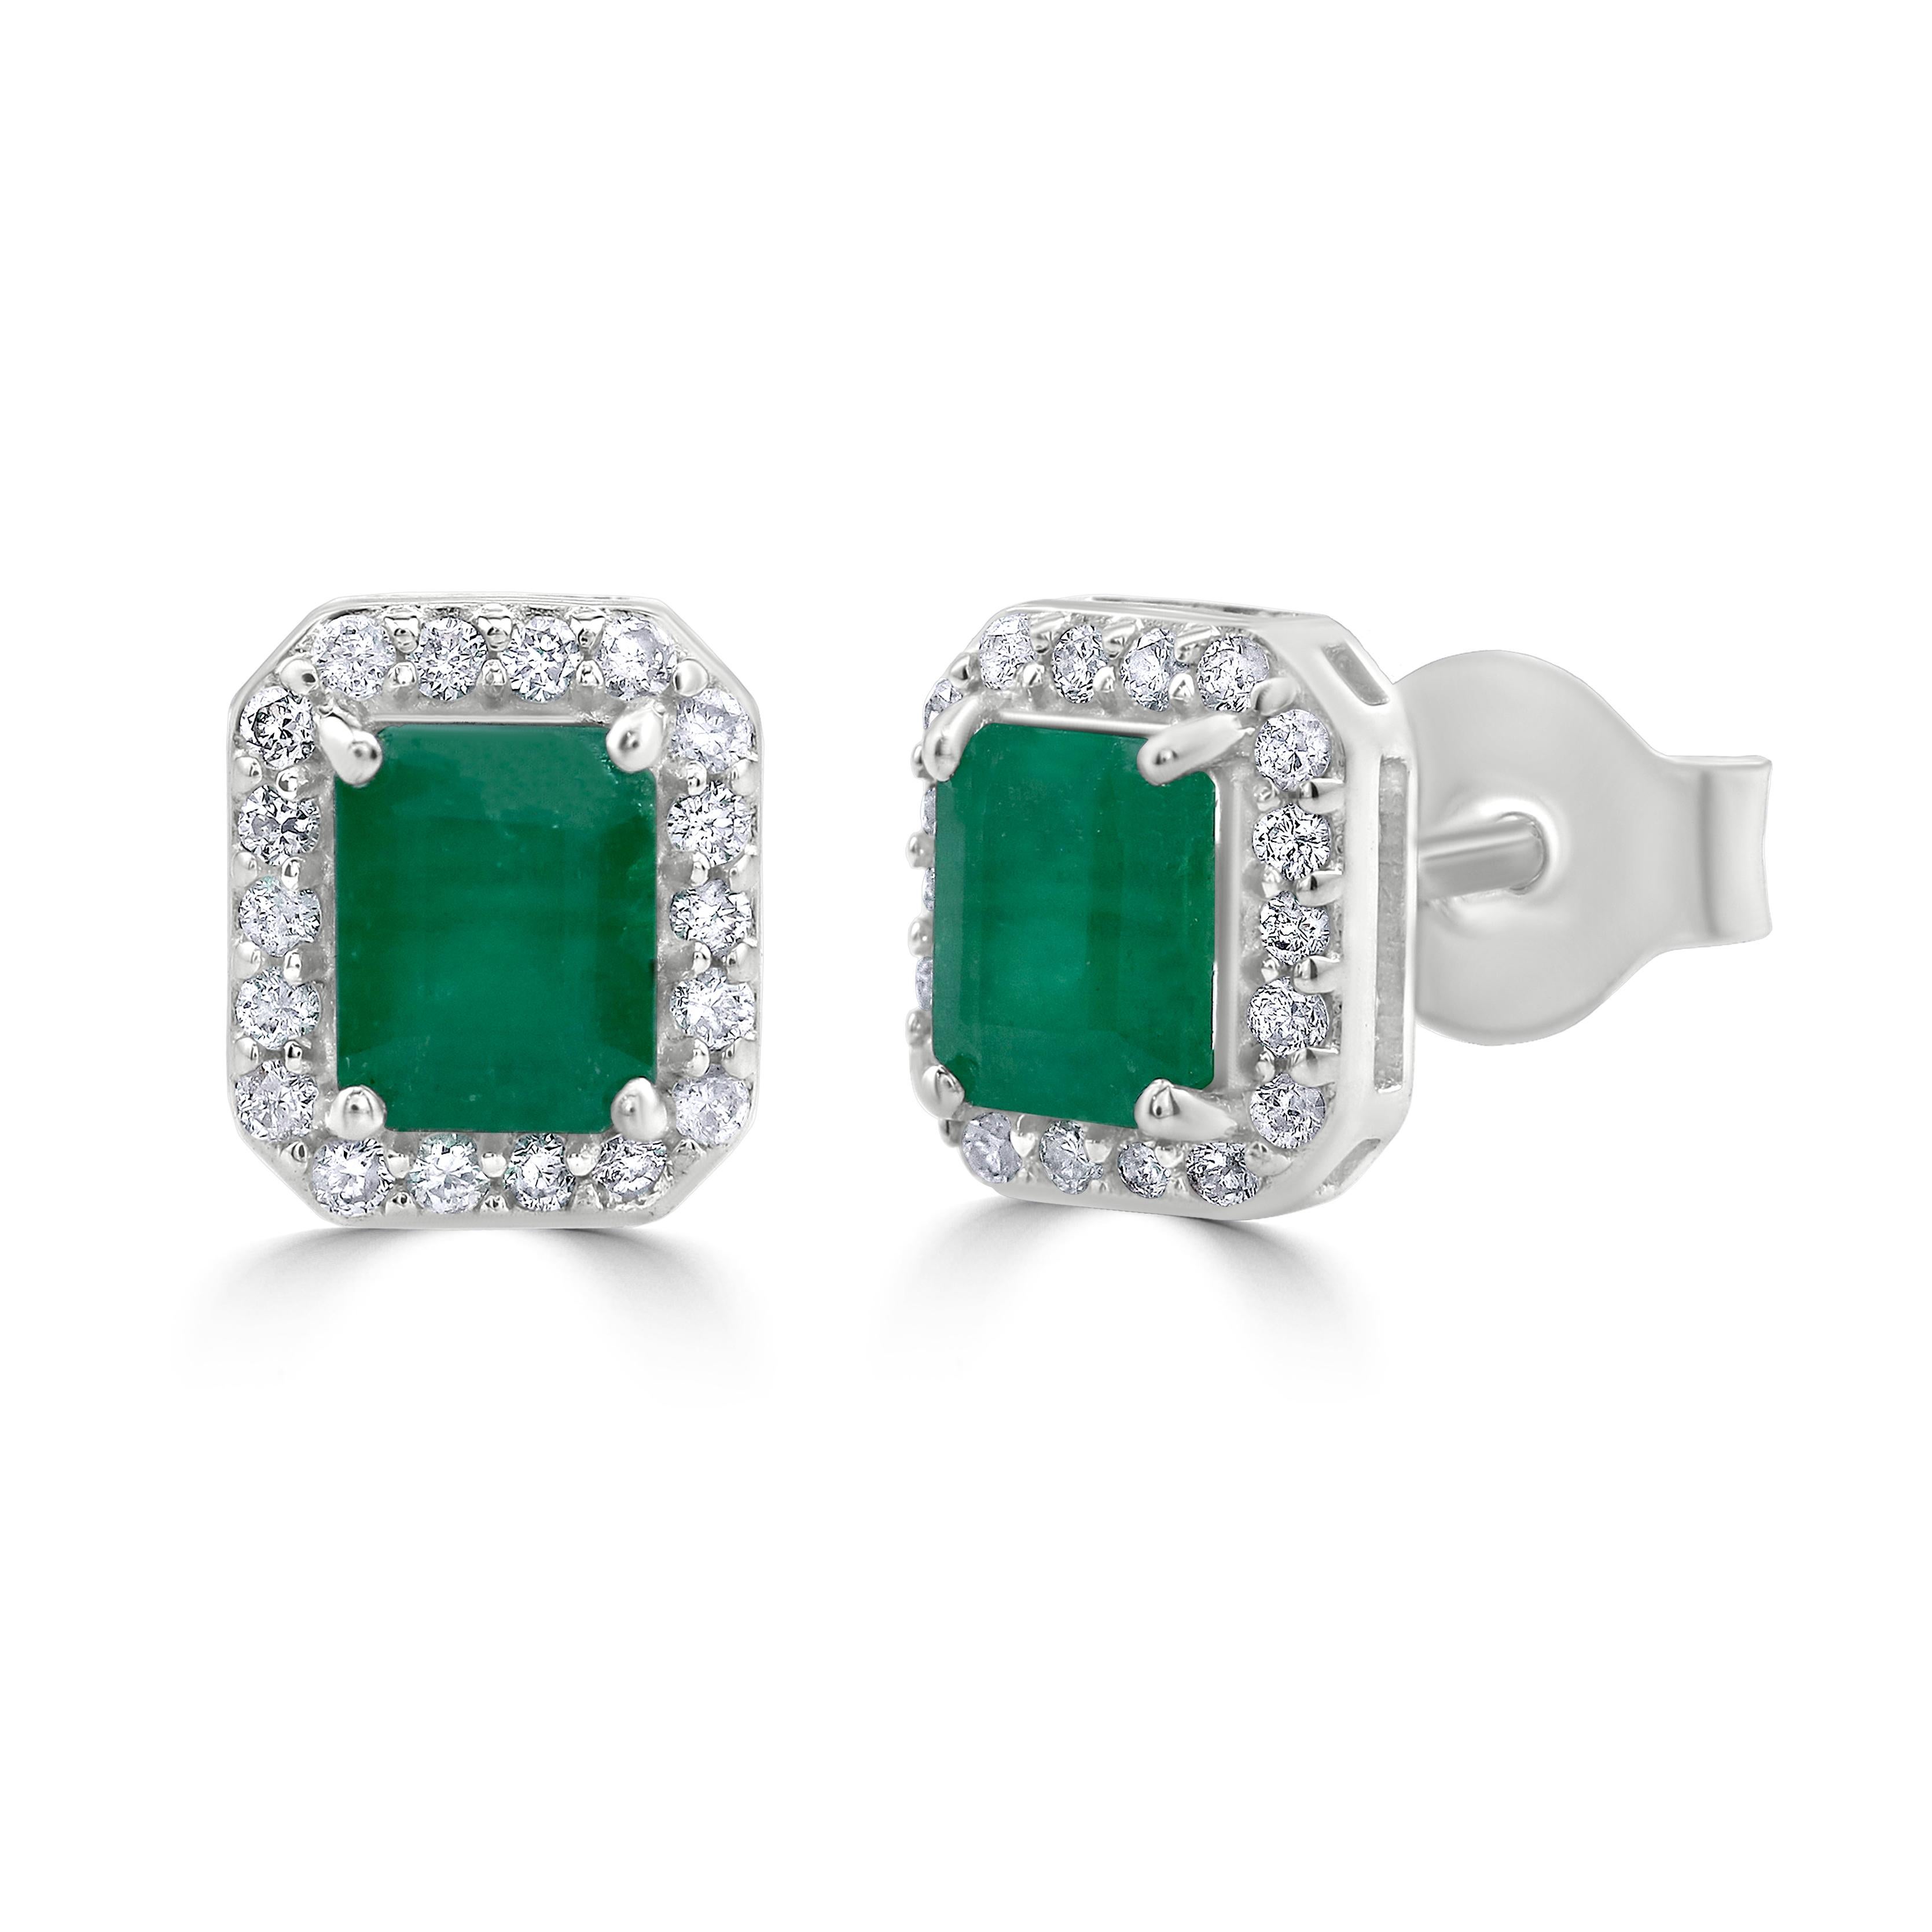 Some of the world's most desirable gemstones come together for this gemstone earring ! These Gemistry stud earrings boast of .98 carat octagon emerald at the center in four prongs accentuated by a halo of round and brilliant cut diamonds, prong set